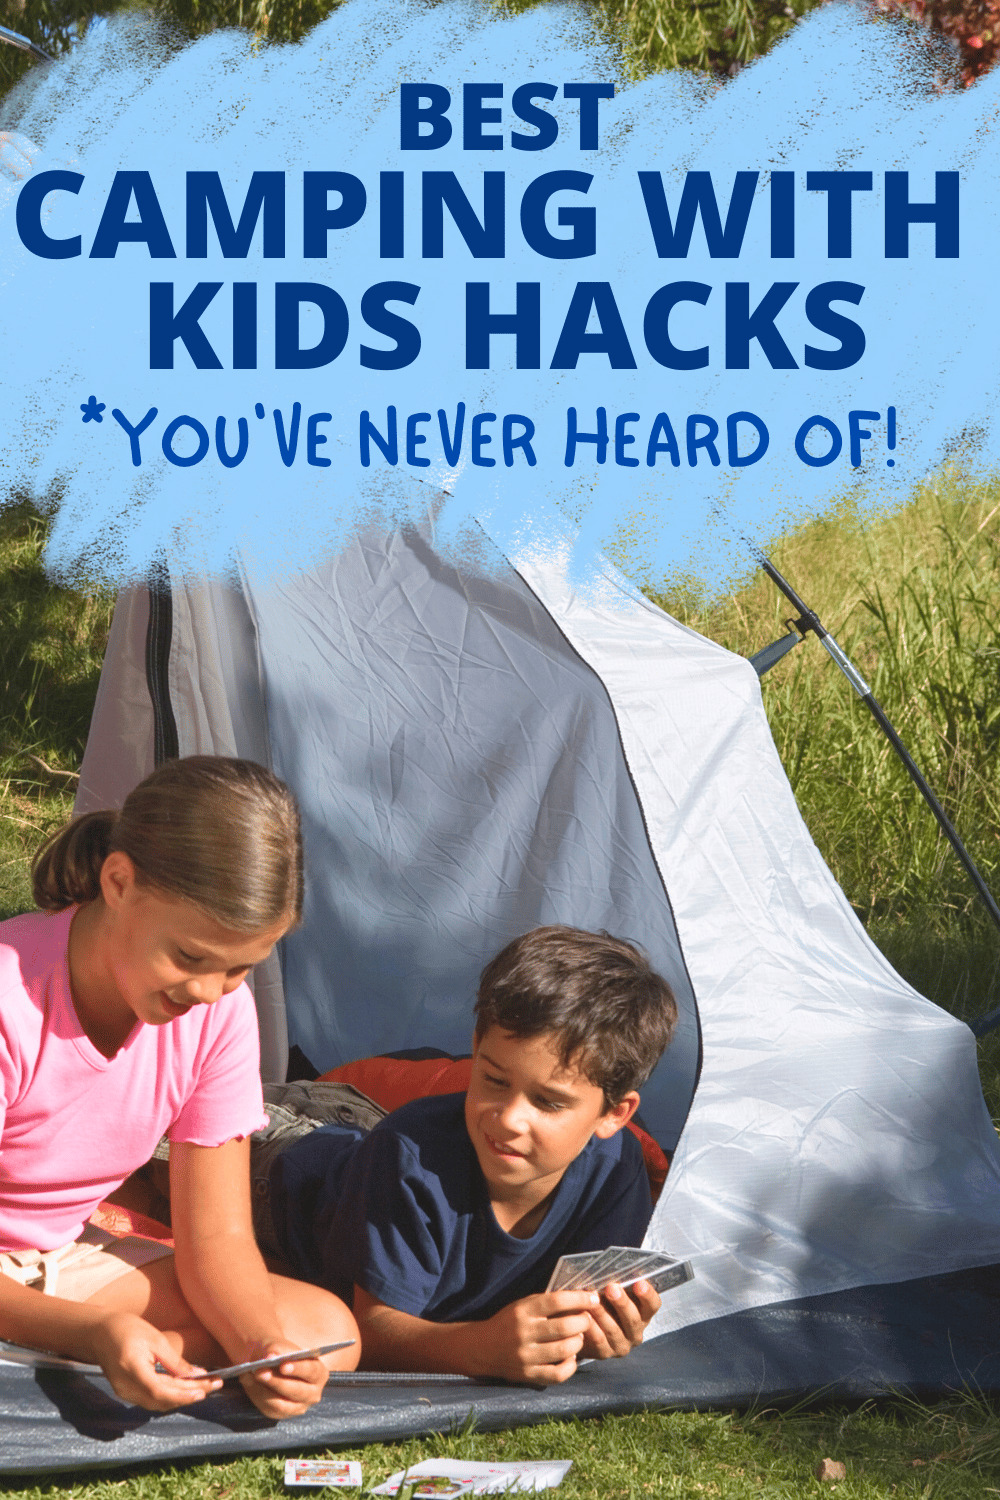 BEST CAMPING HACKS WITH KIDS boy tween and girl tween playing cards in a camping tent